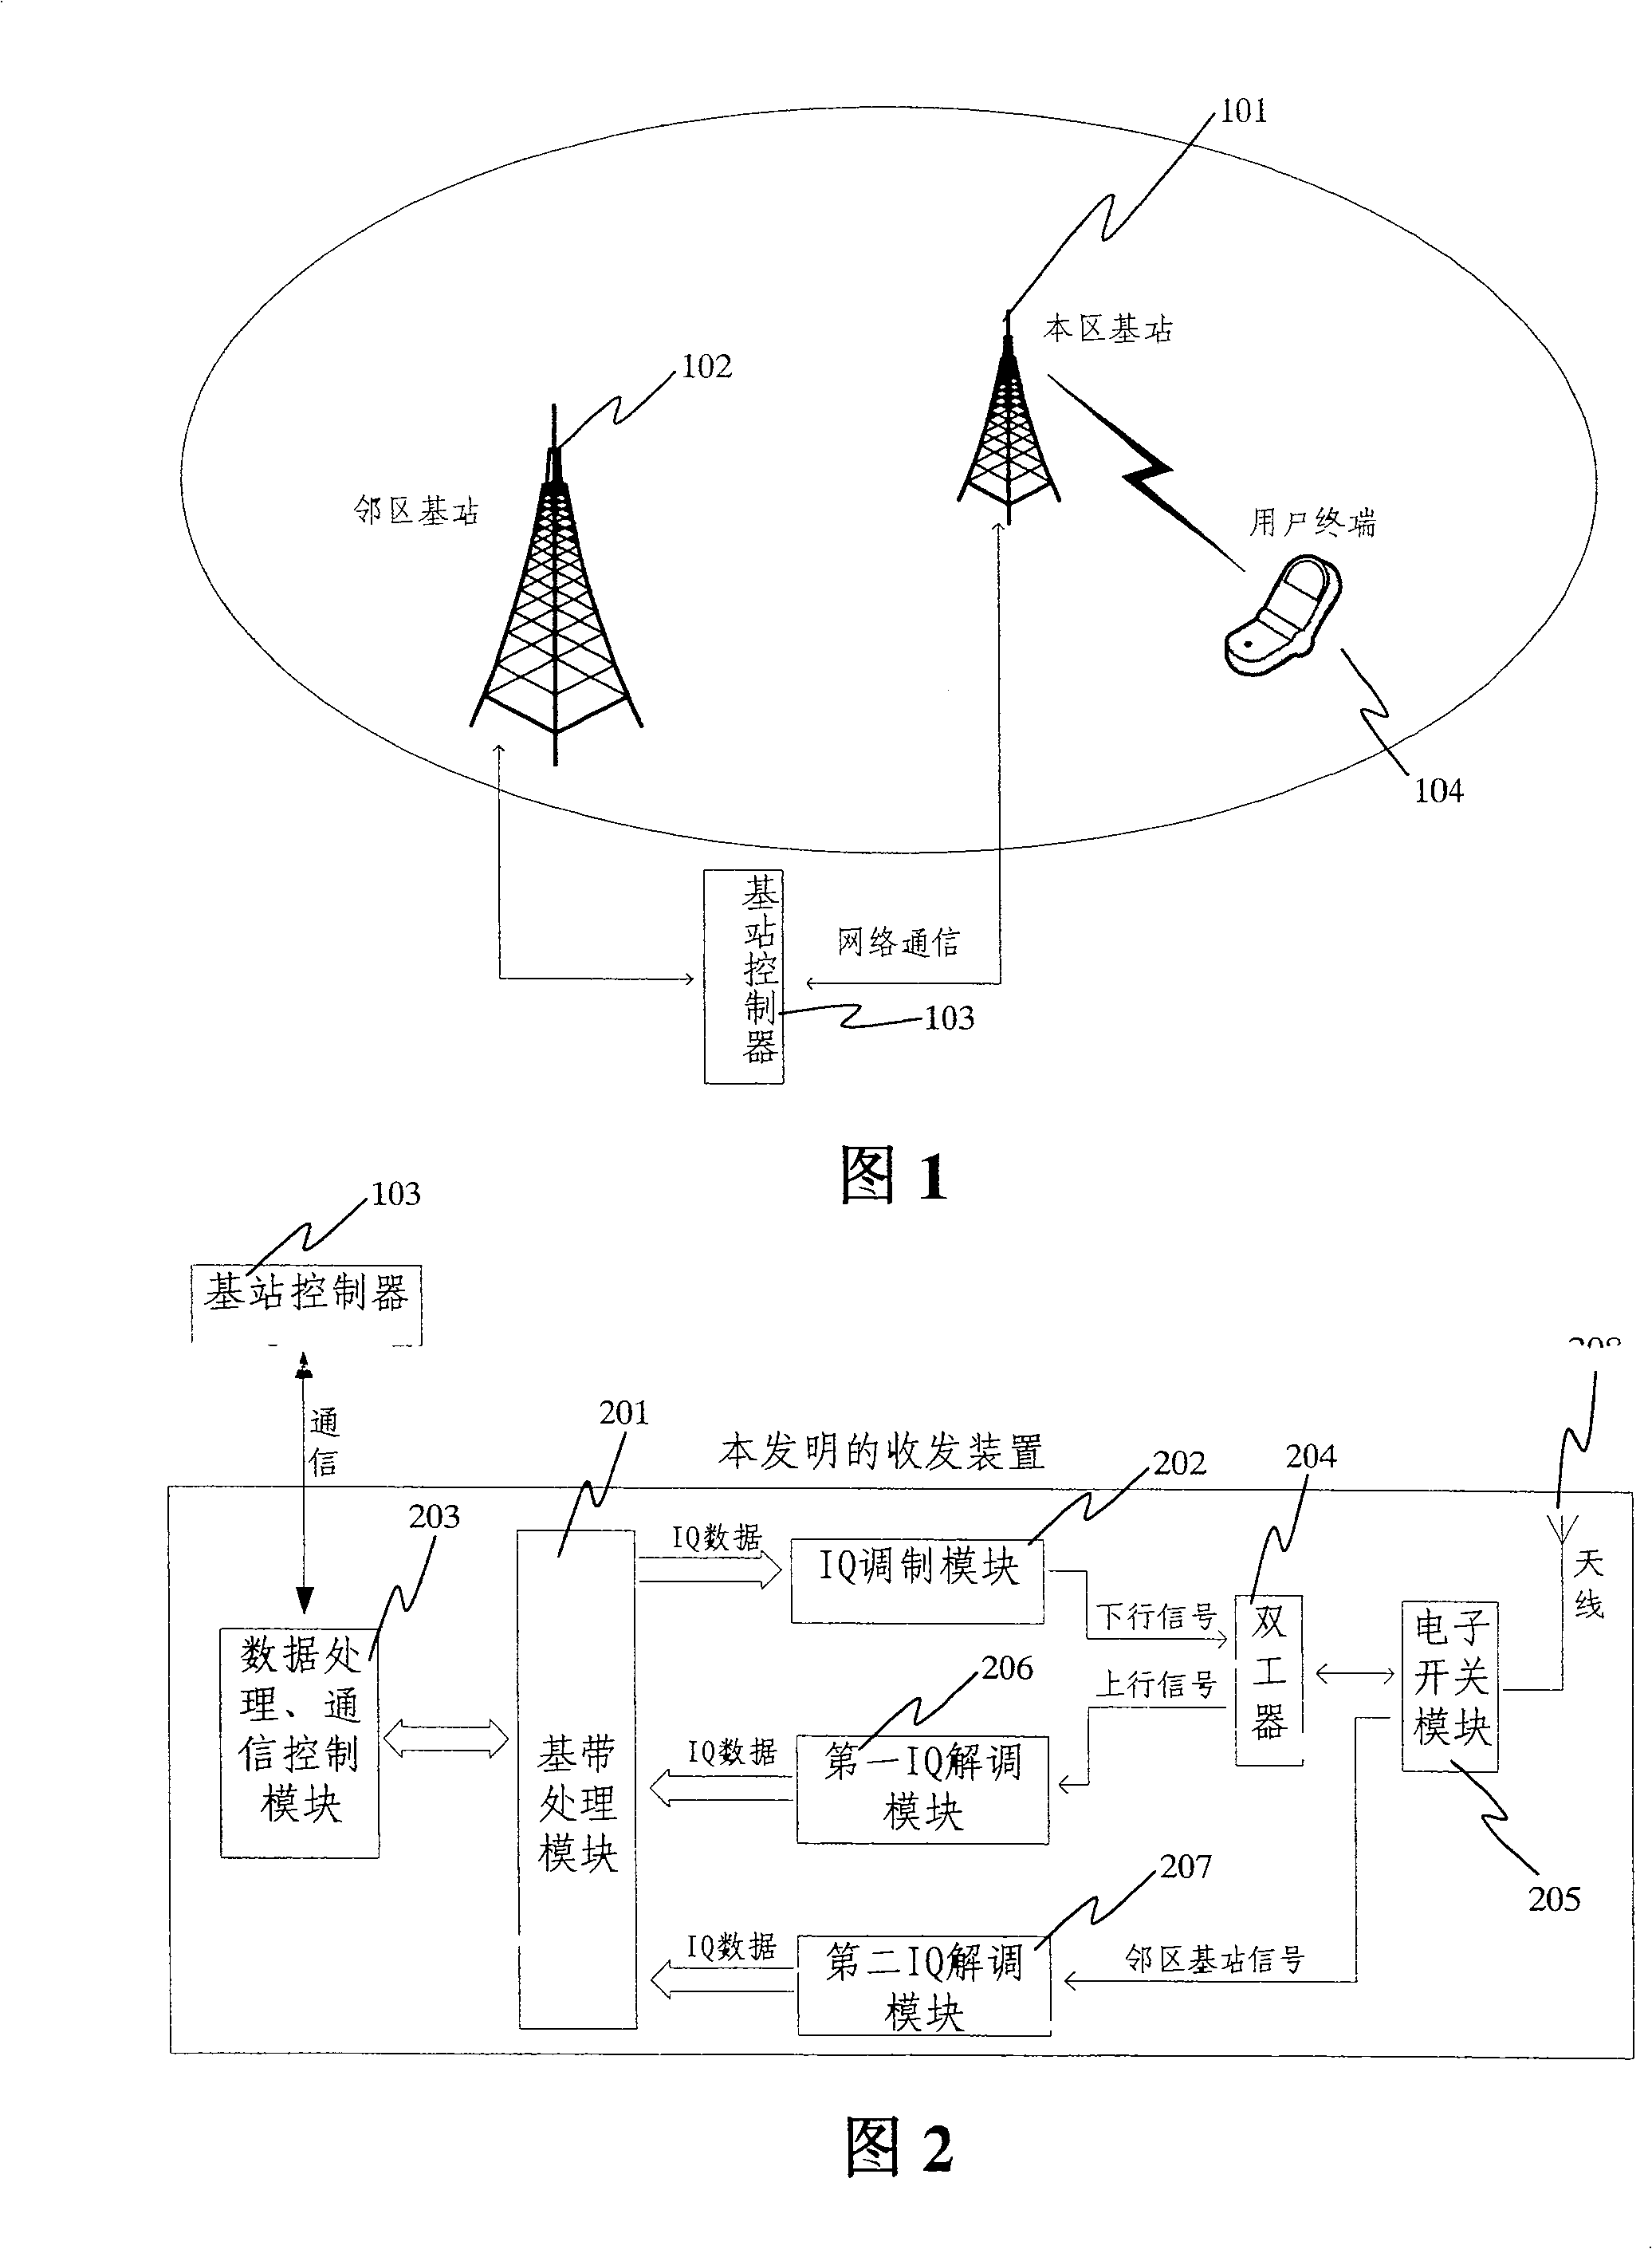 System for obtaining neighbor base station information to realize self-adoptive group network